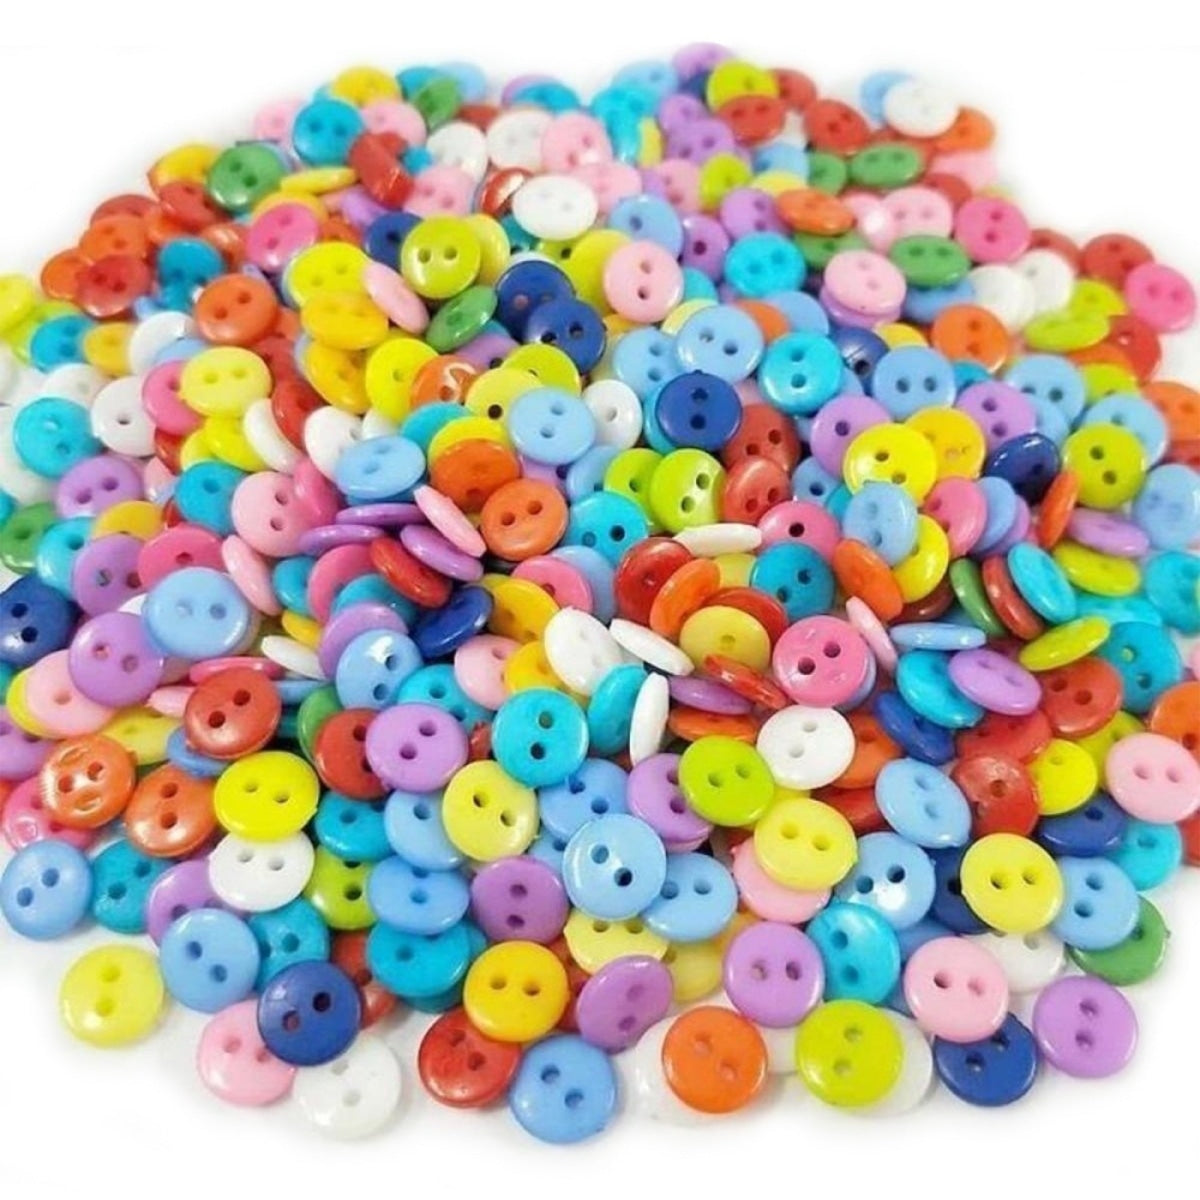 100Pcs 2 Hole Childrens Babys Clothing Buttons 7.5Mm Round Colourful